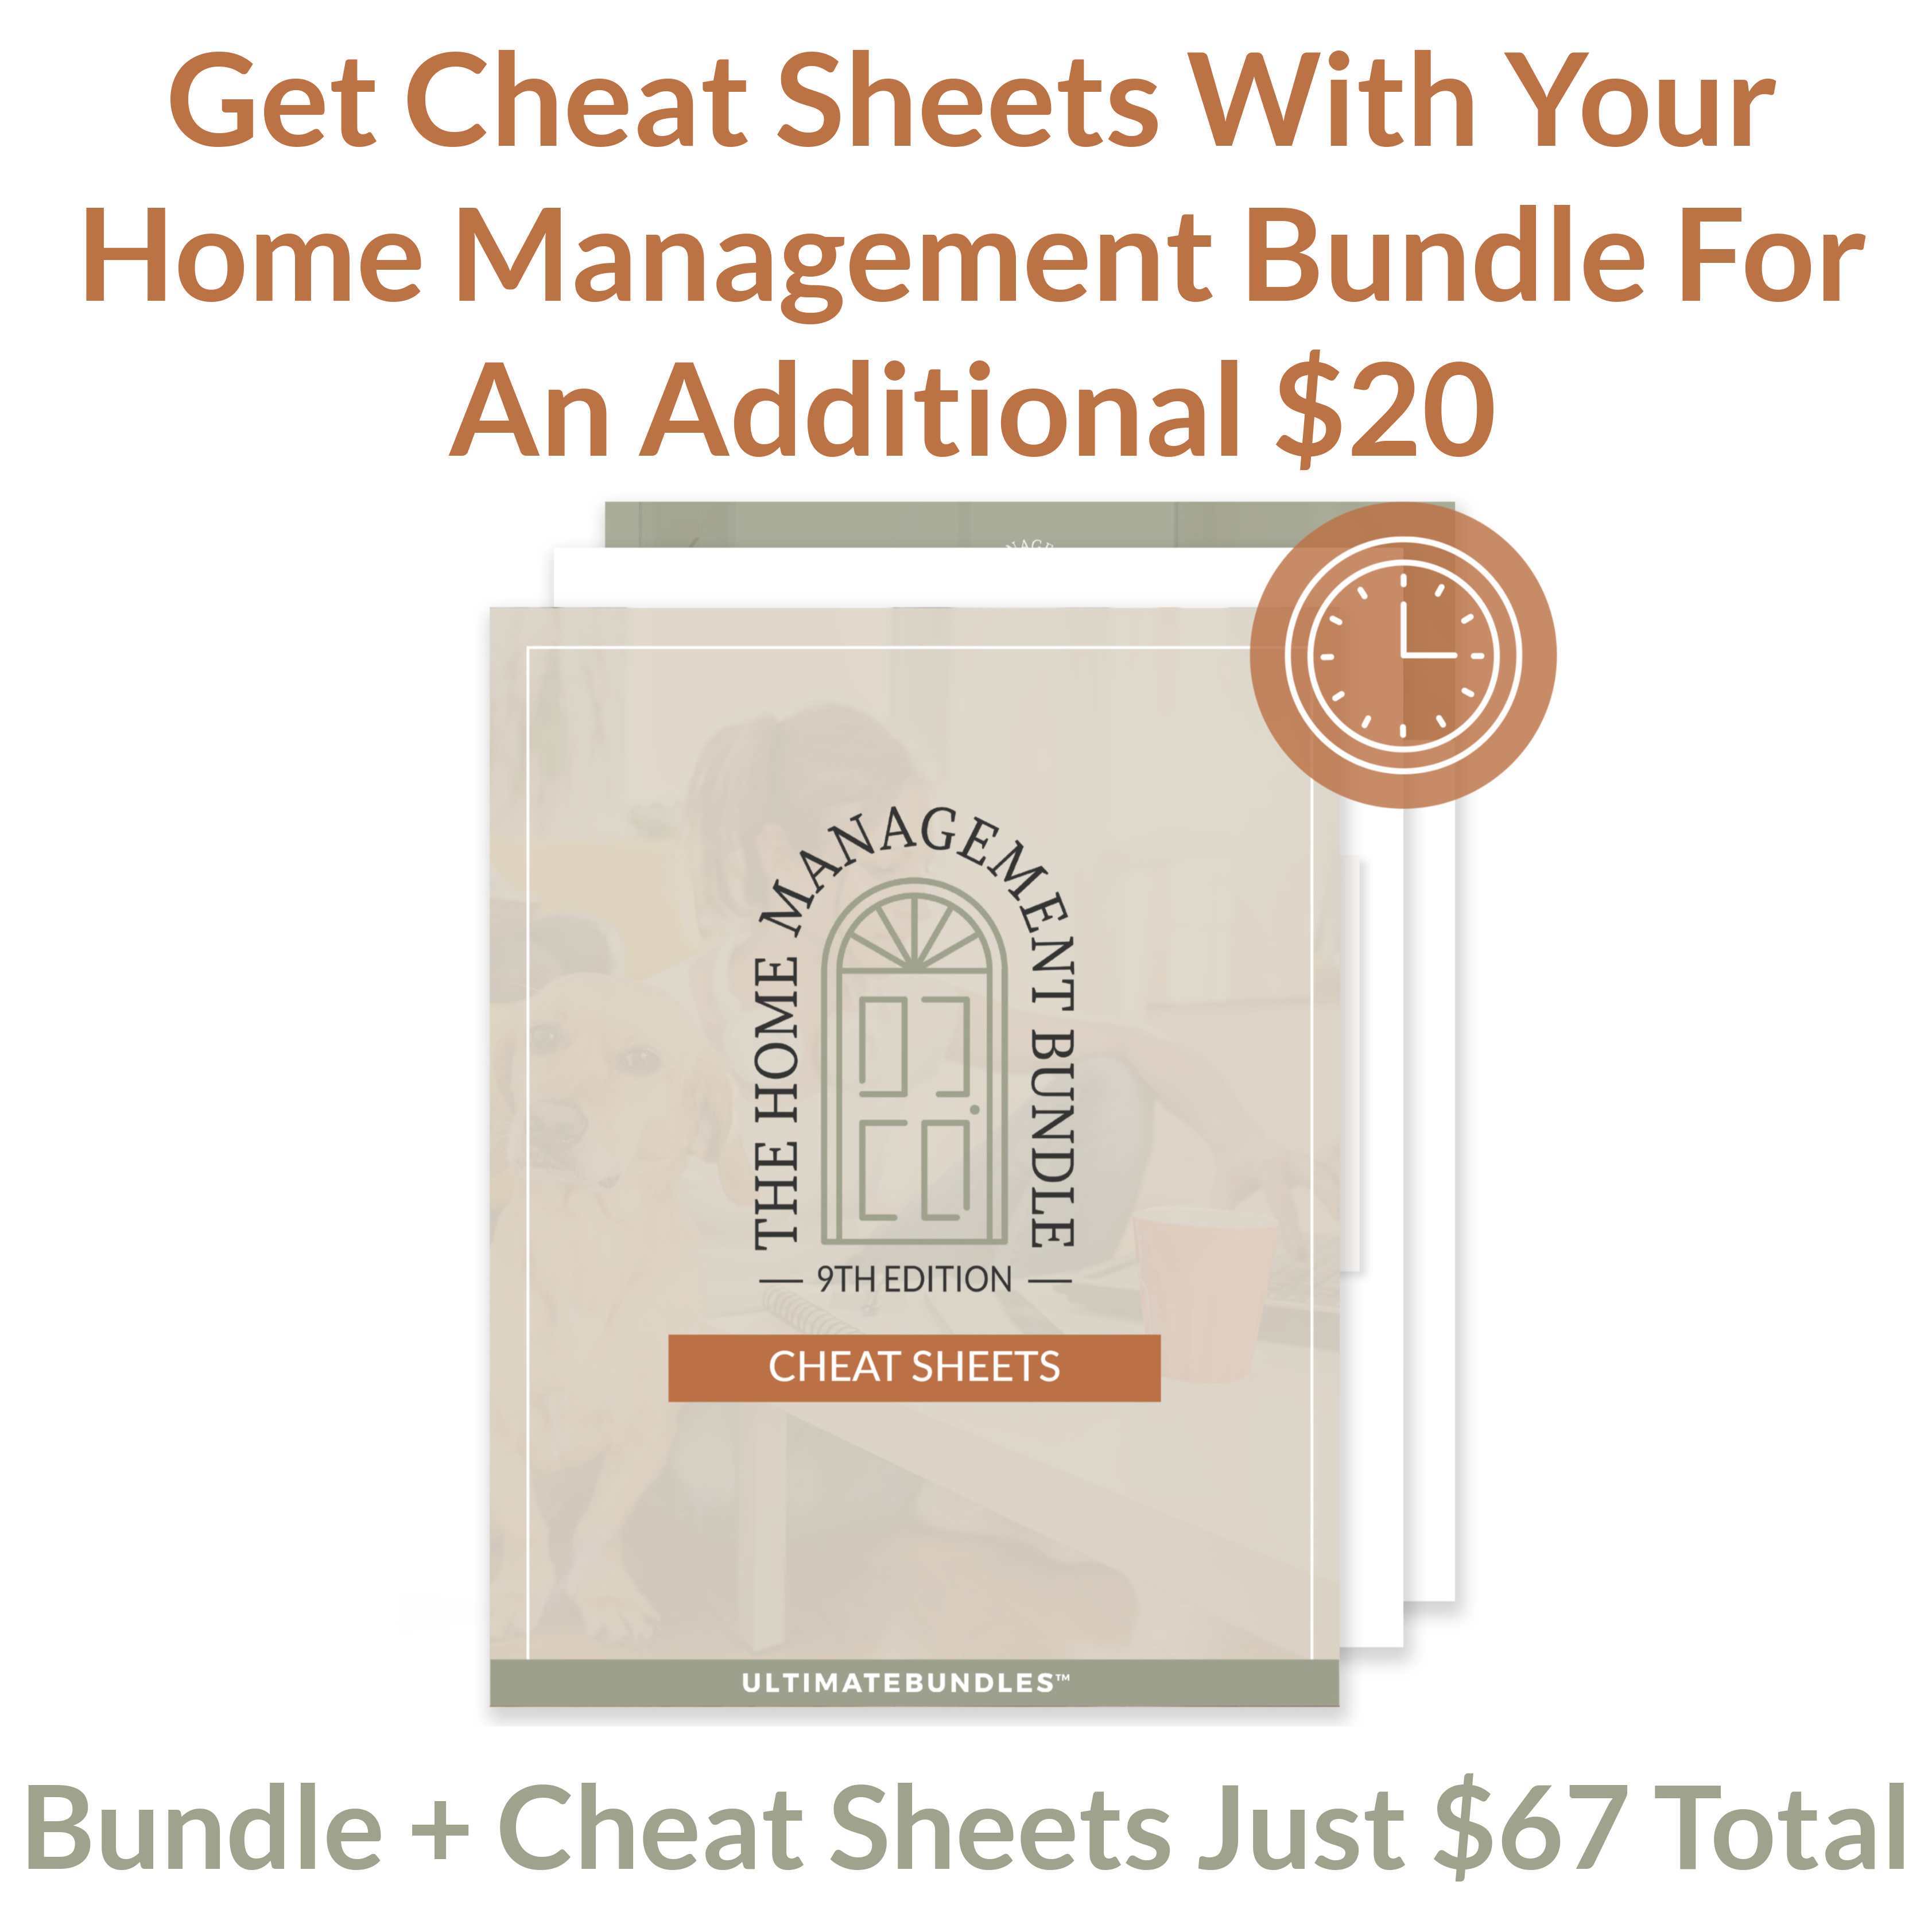 Get Cheat Sheets for your 2022 Home Management Bundle for just $20 more